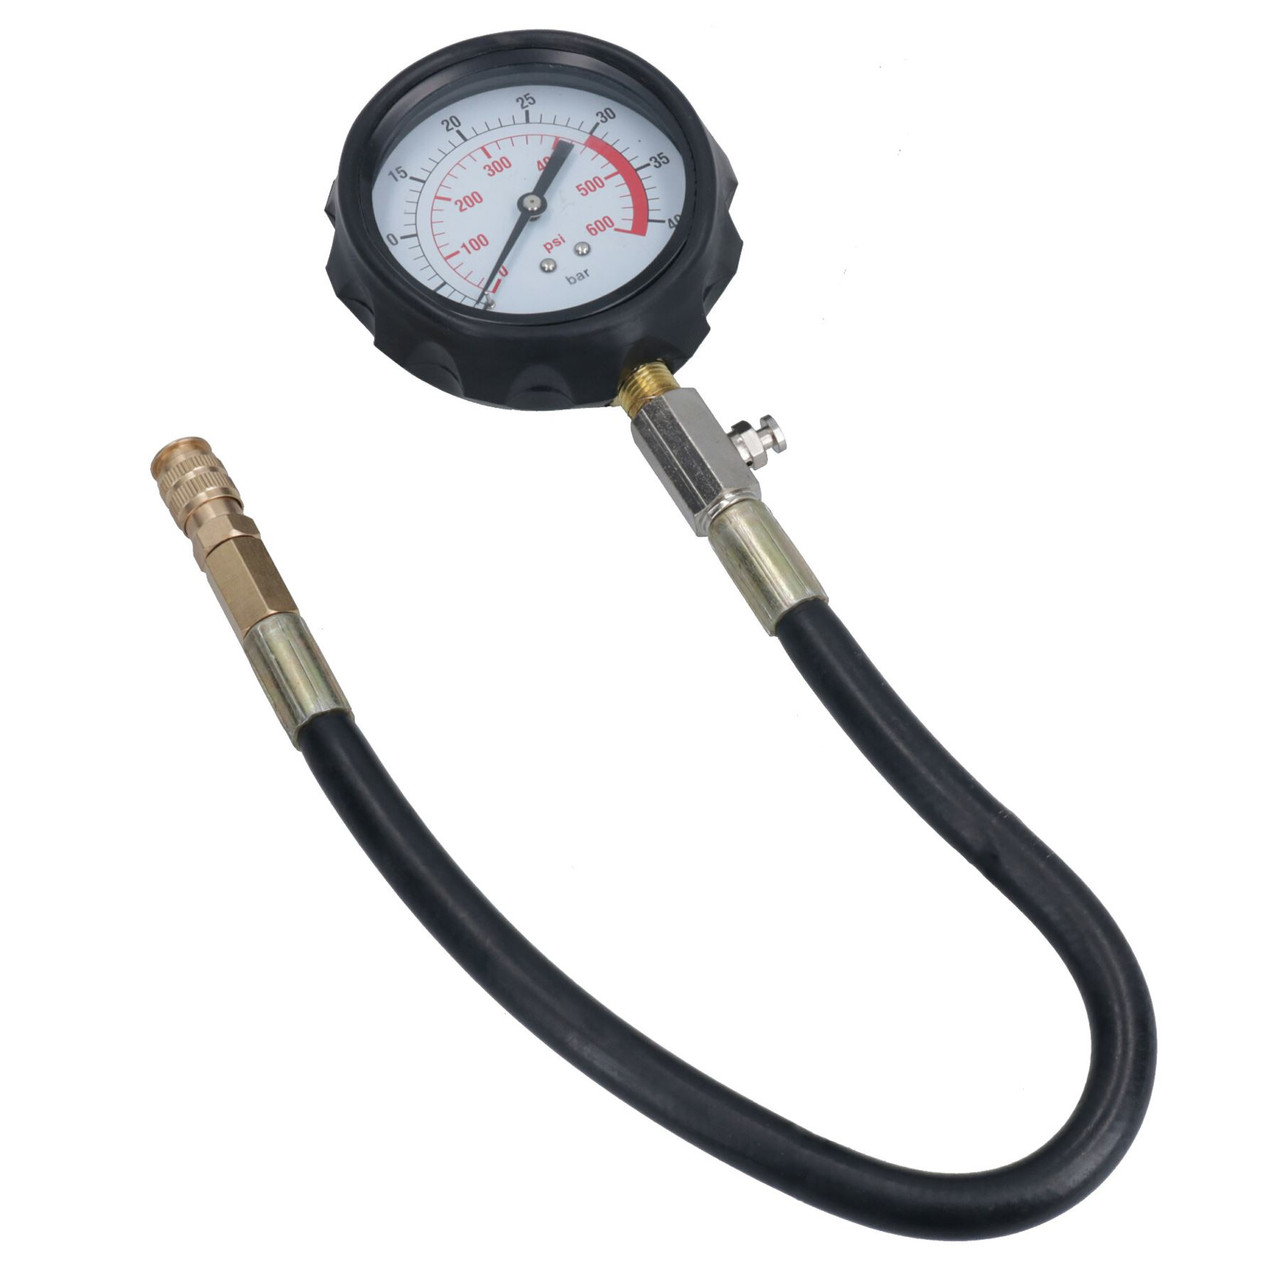 Replacement Gauge For Compression Testers on Diesel Petrol Engines 0 – 600 PSI